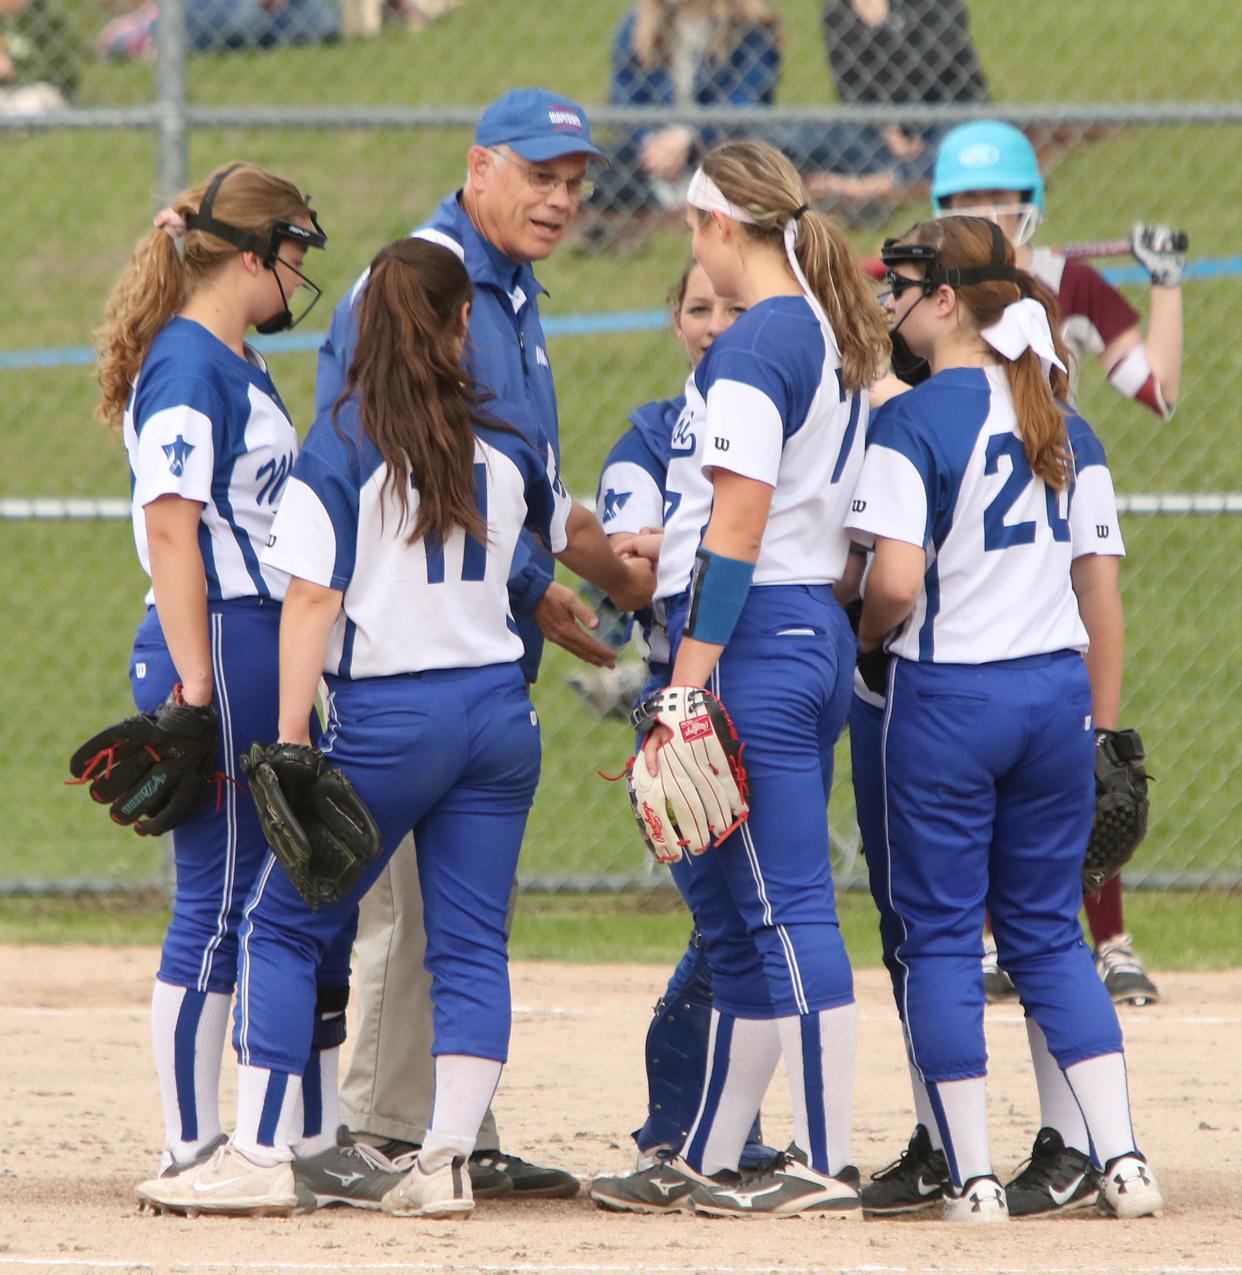 MVU coach Jay Hartman lightens the mood during a visit to the pitchers circle in the T-Birds’ 5-1 win over Lyndon in the Division I softball semifinals in Swanton on Tuesday, June 4, 2019.